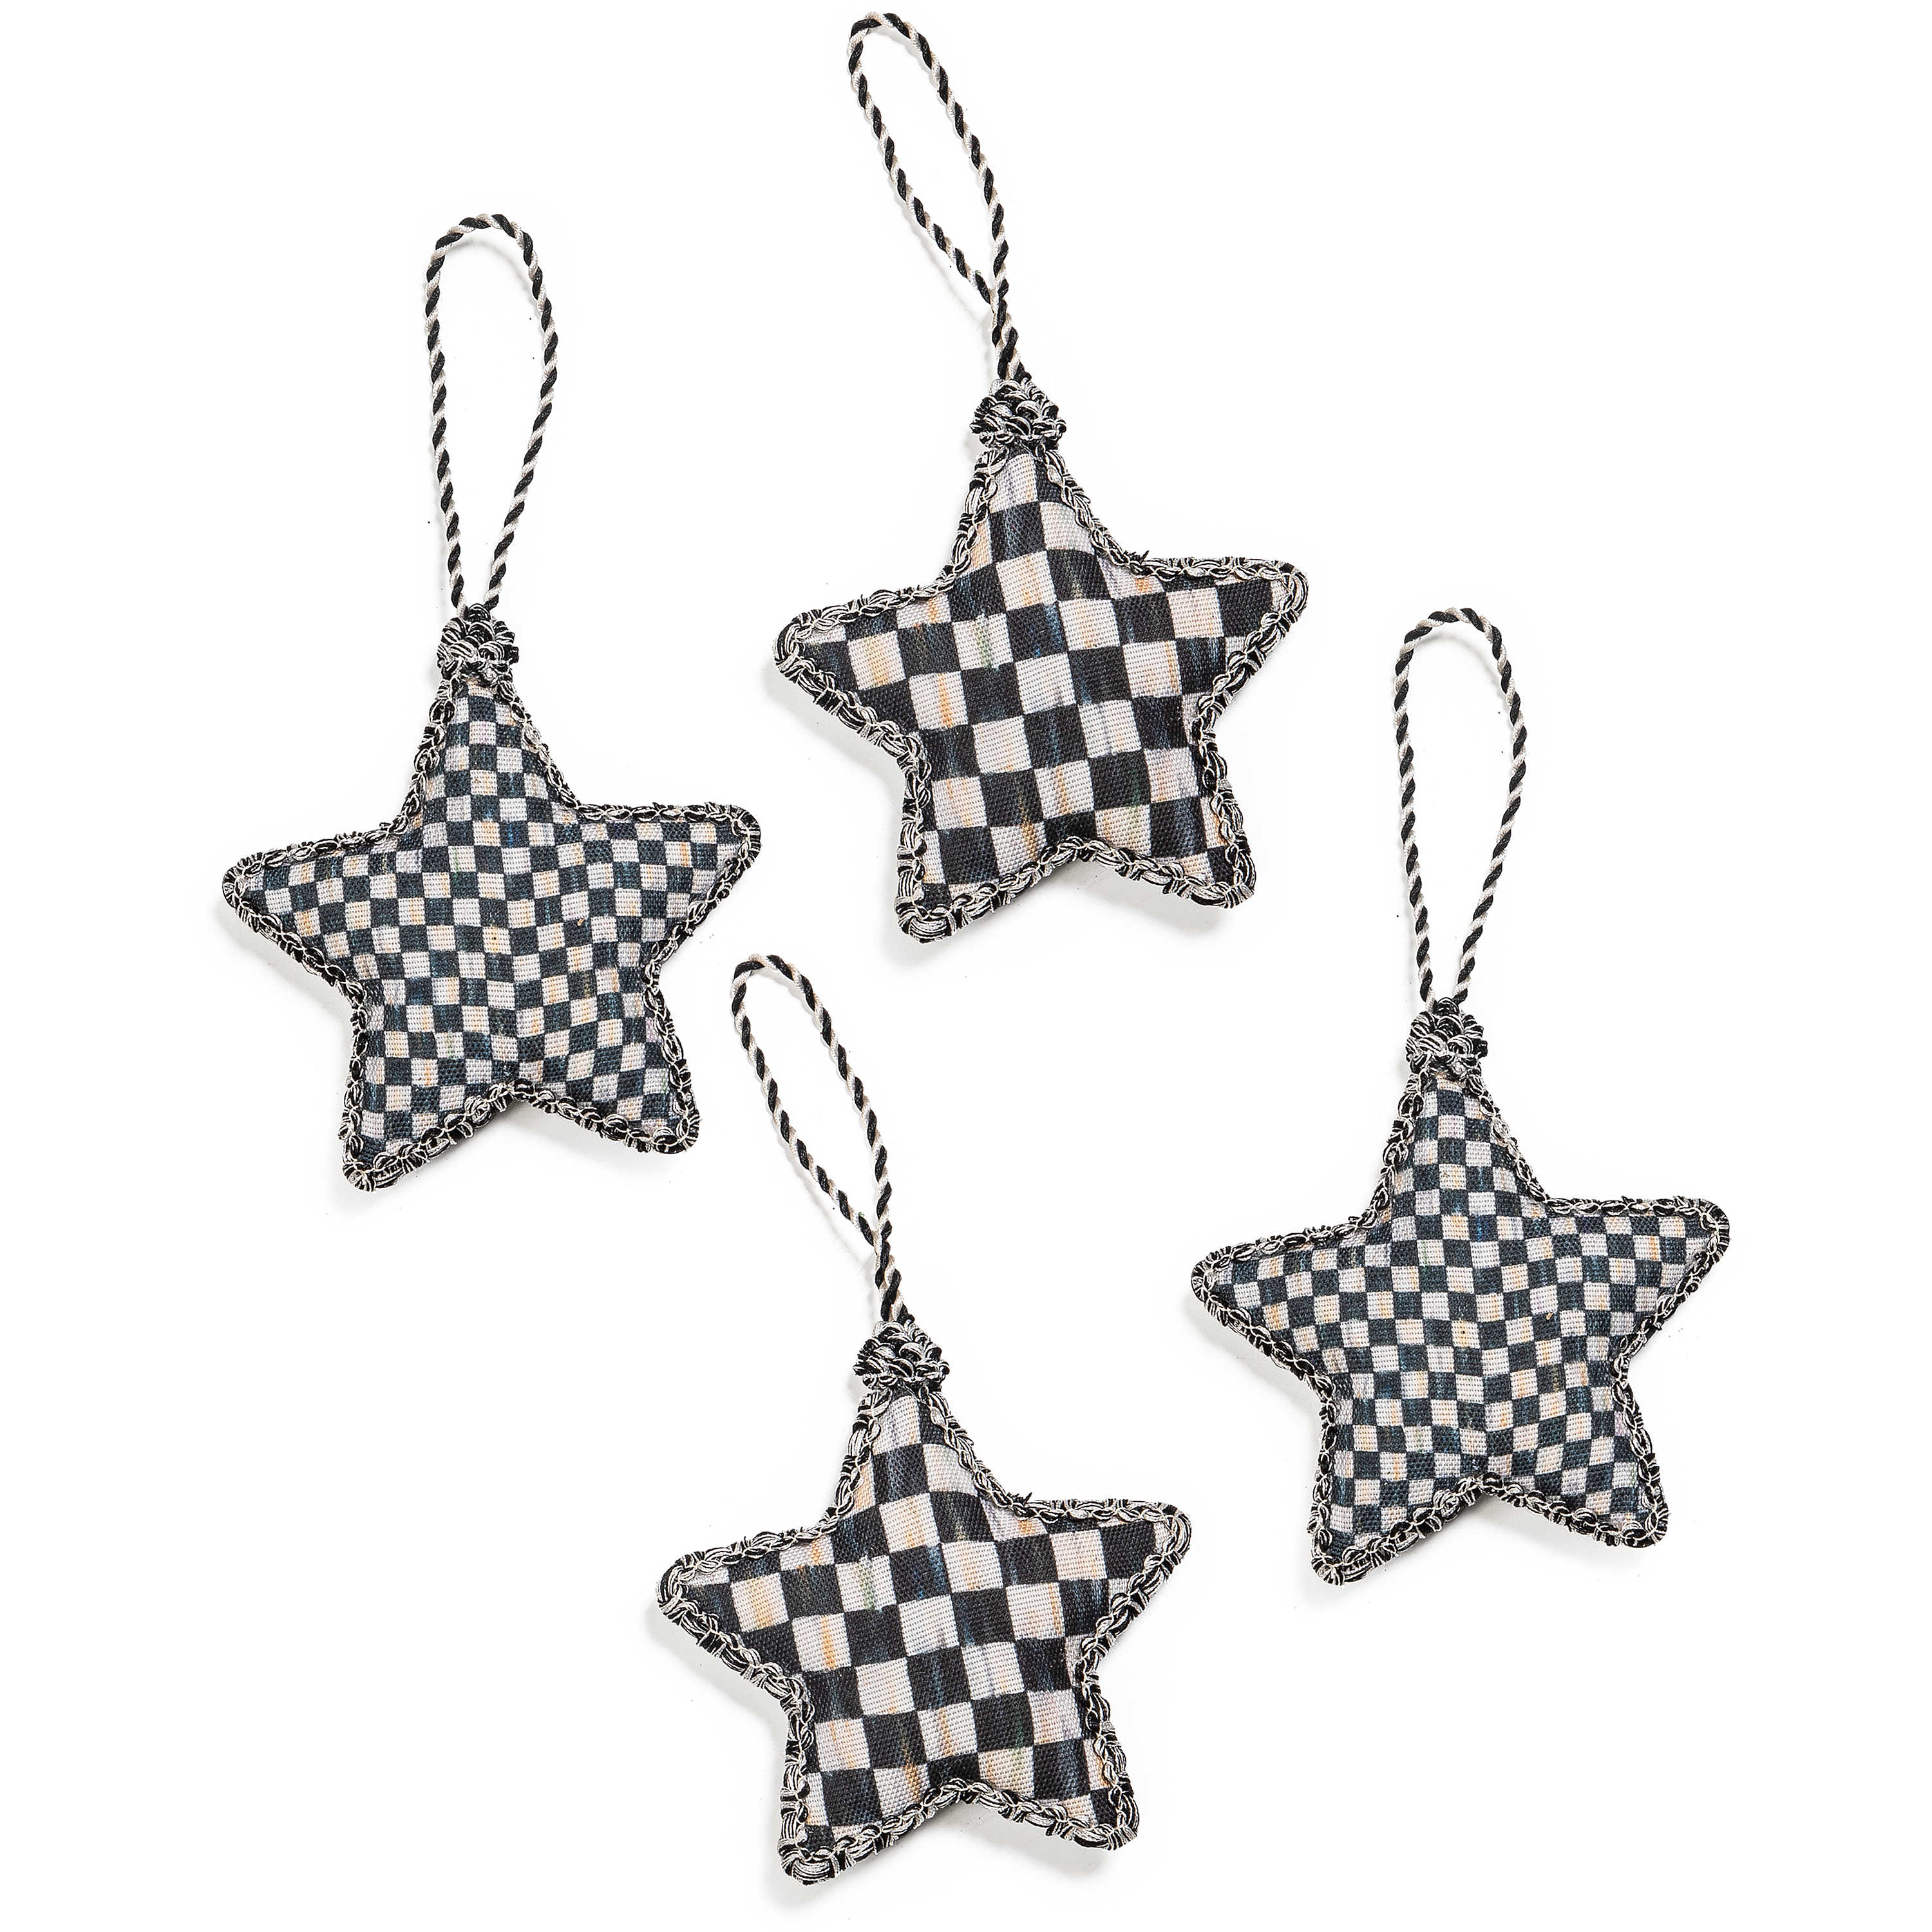 Courtly Check Star Ornaments, Set of 4 mackenzie-childs Panama 0